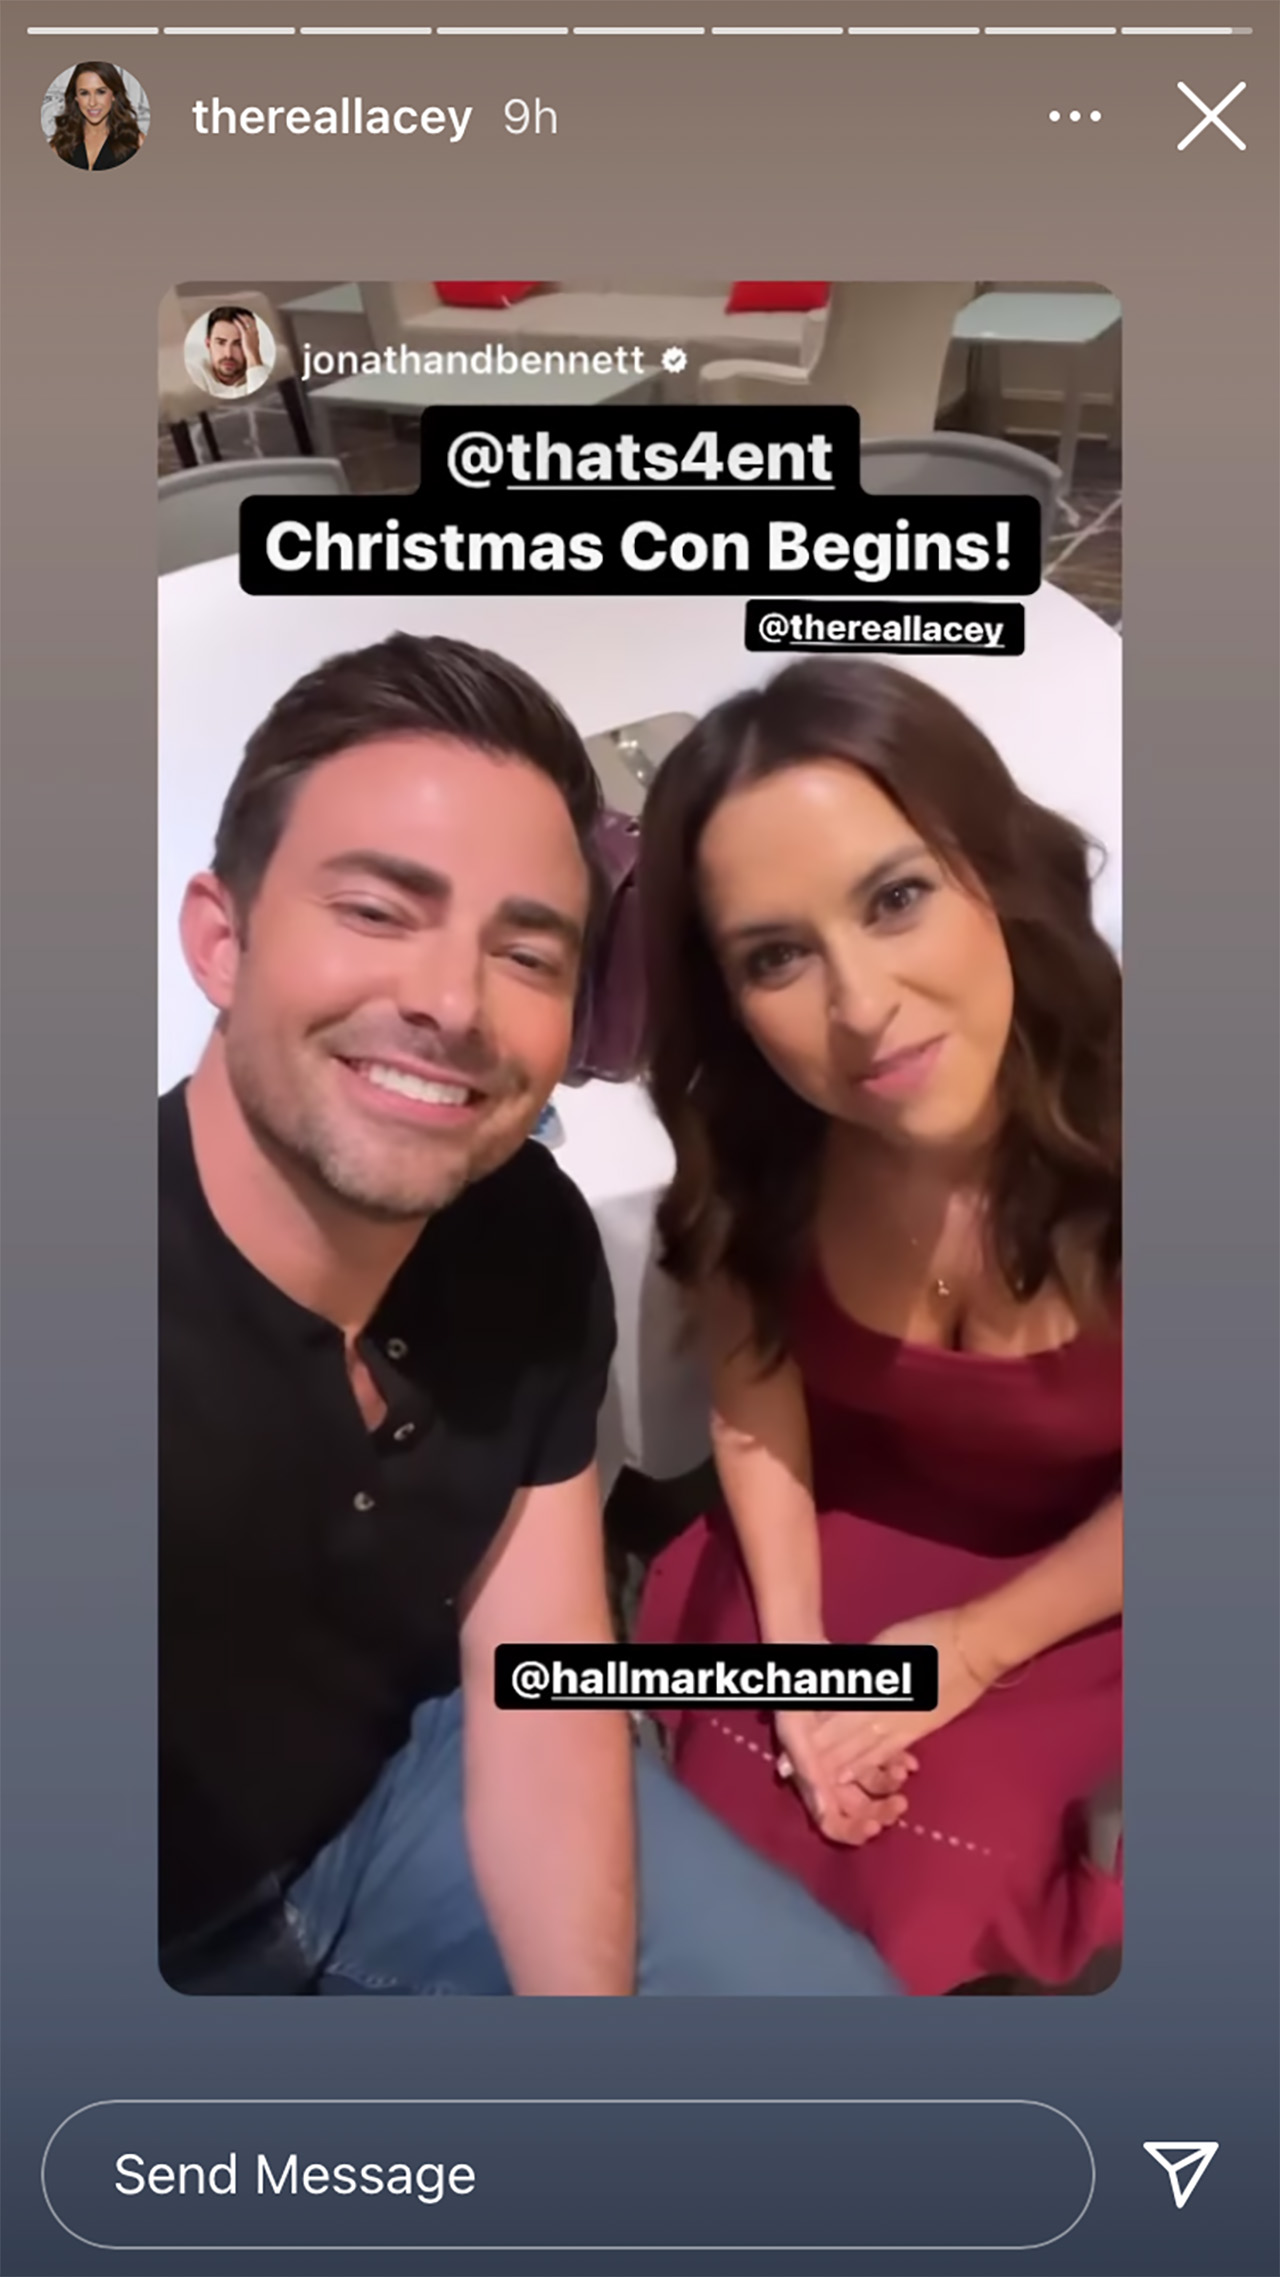 Lacey Chabert and Jonathan Bennett reuniting at Christmas Con